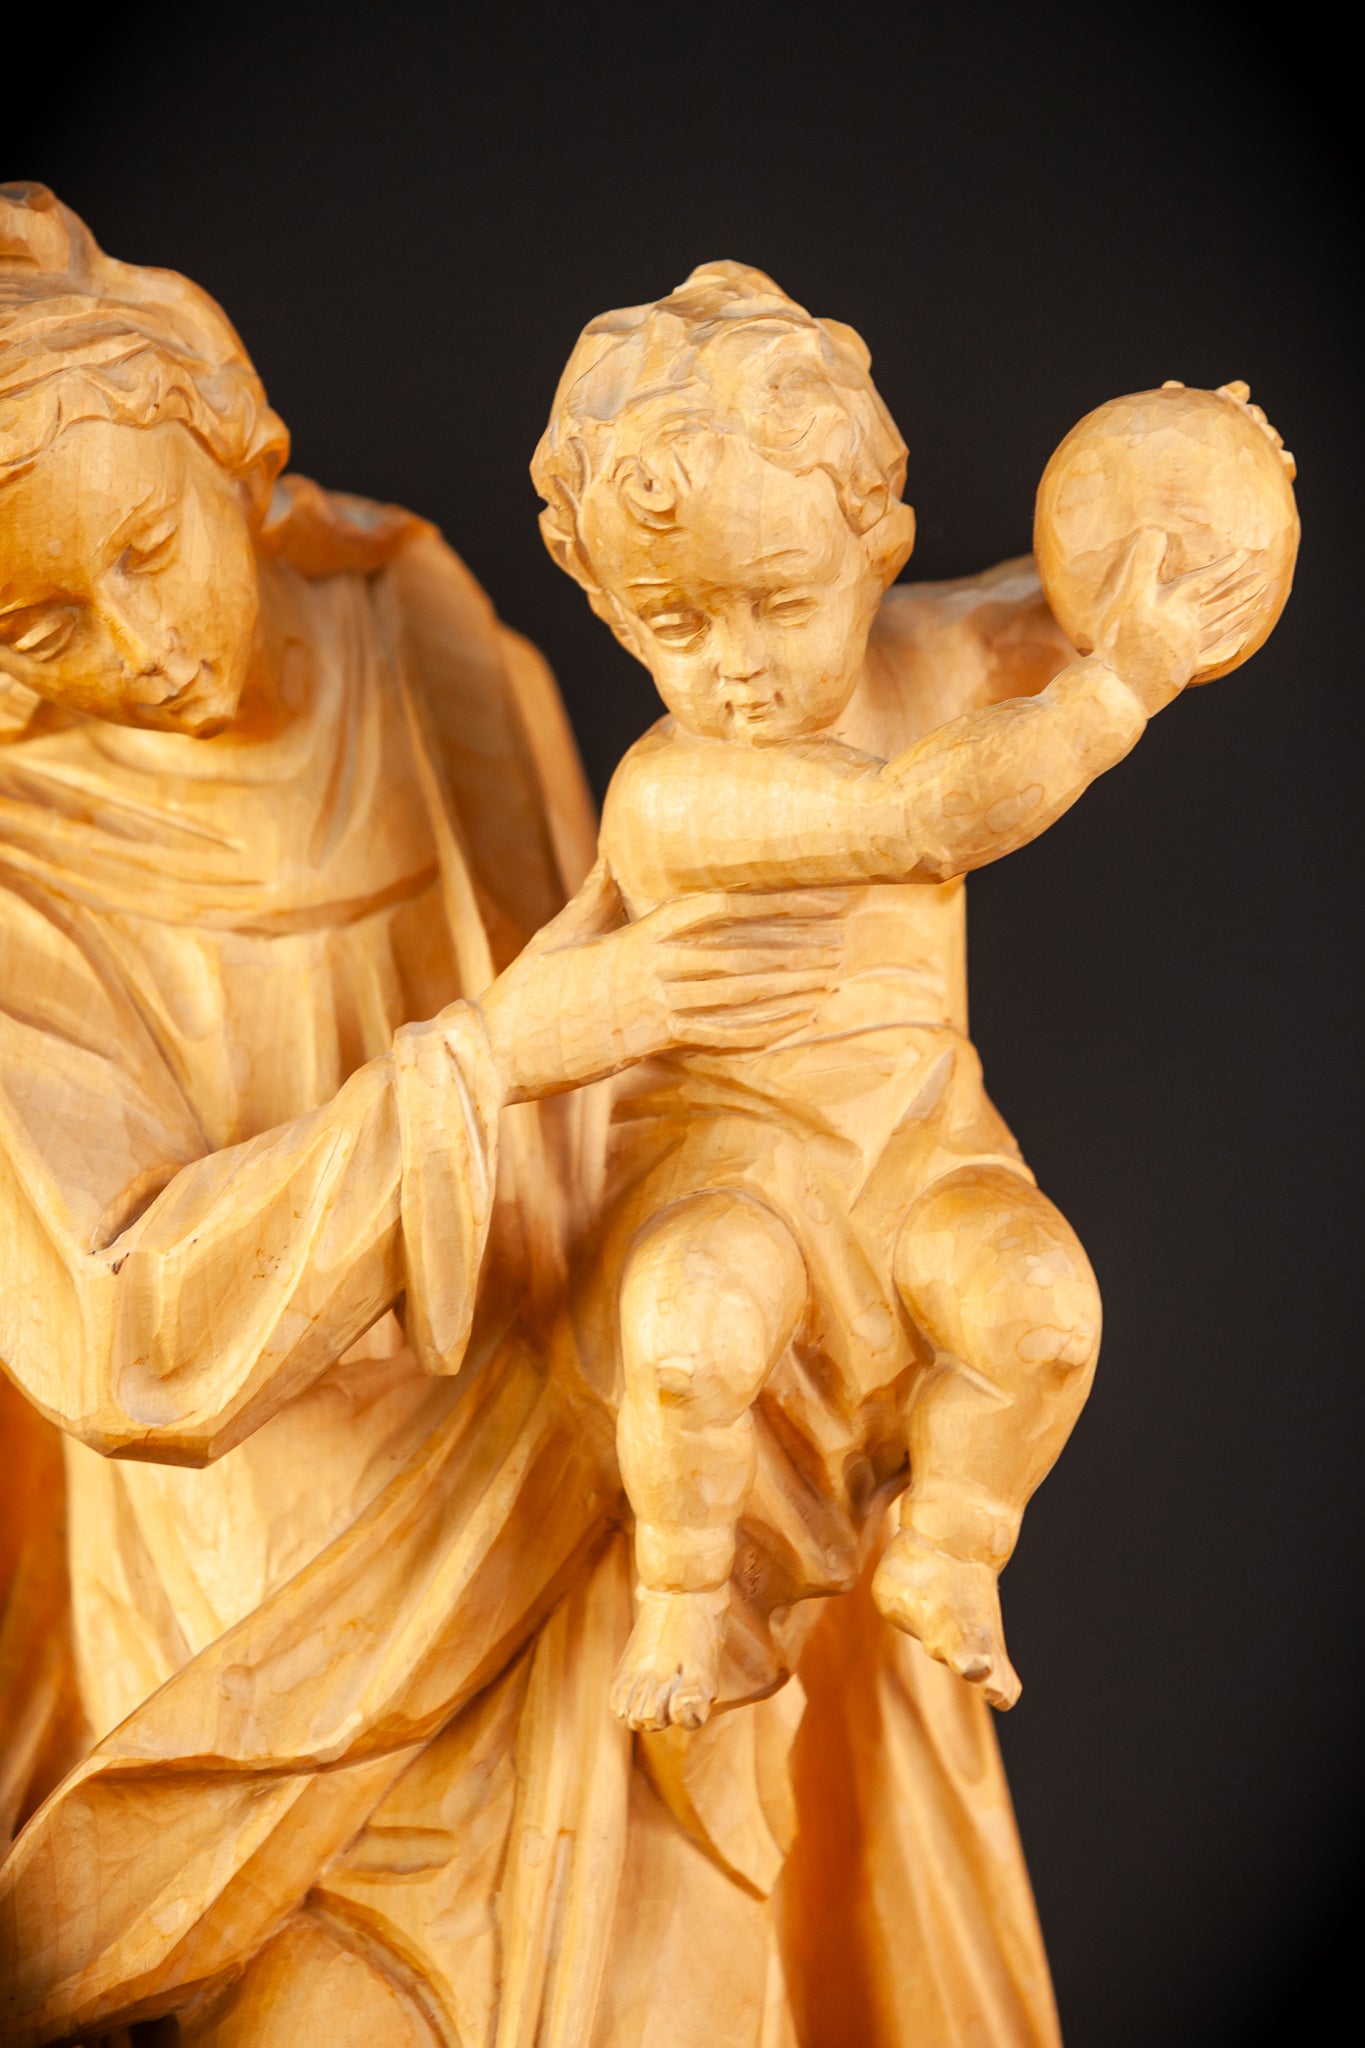 Virgin Mary with Child Jesus Wooden Sculpture | 18.9” / 48 cm